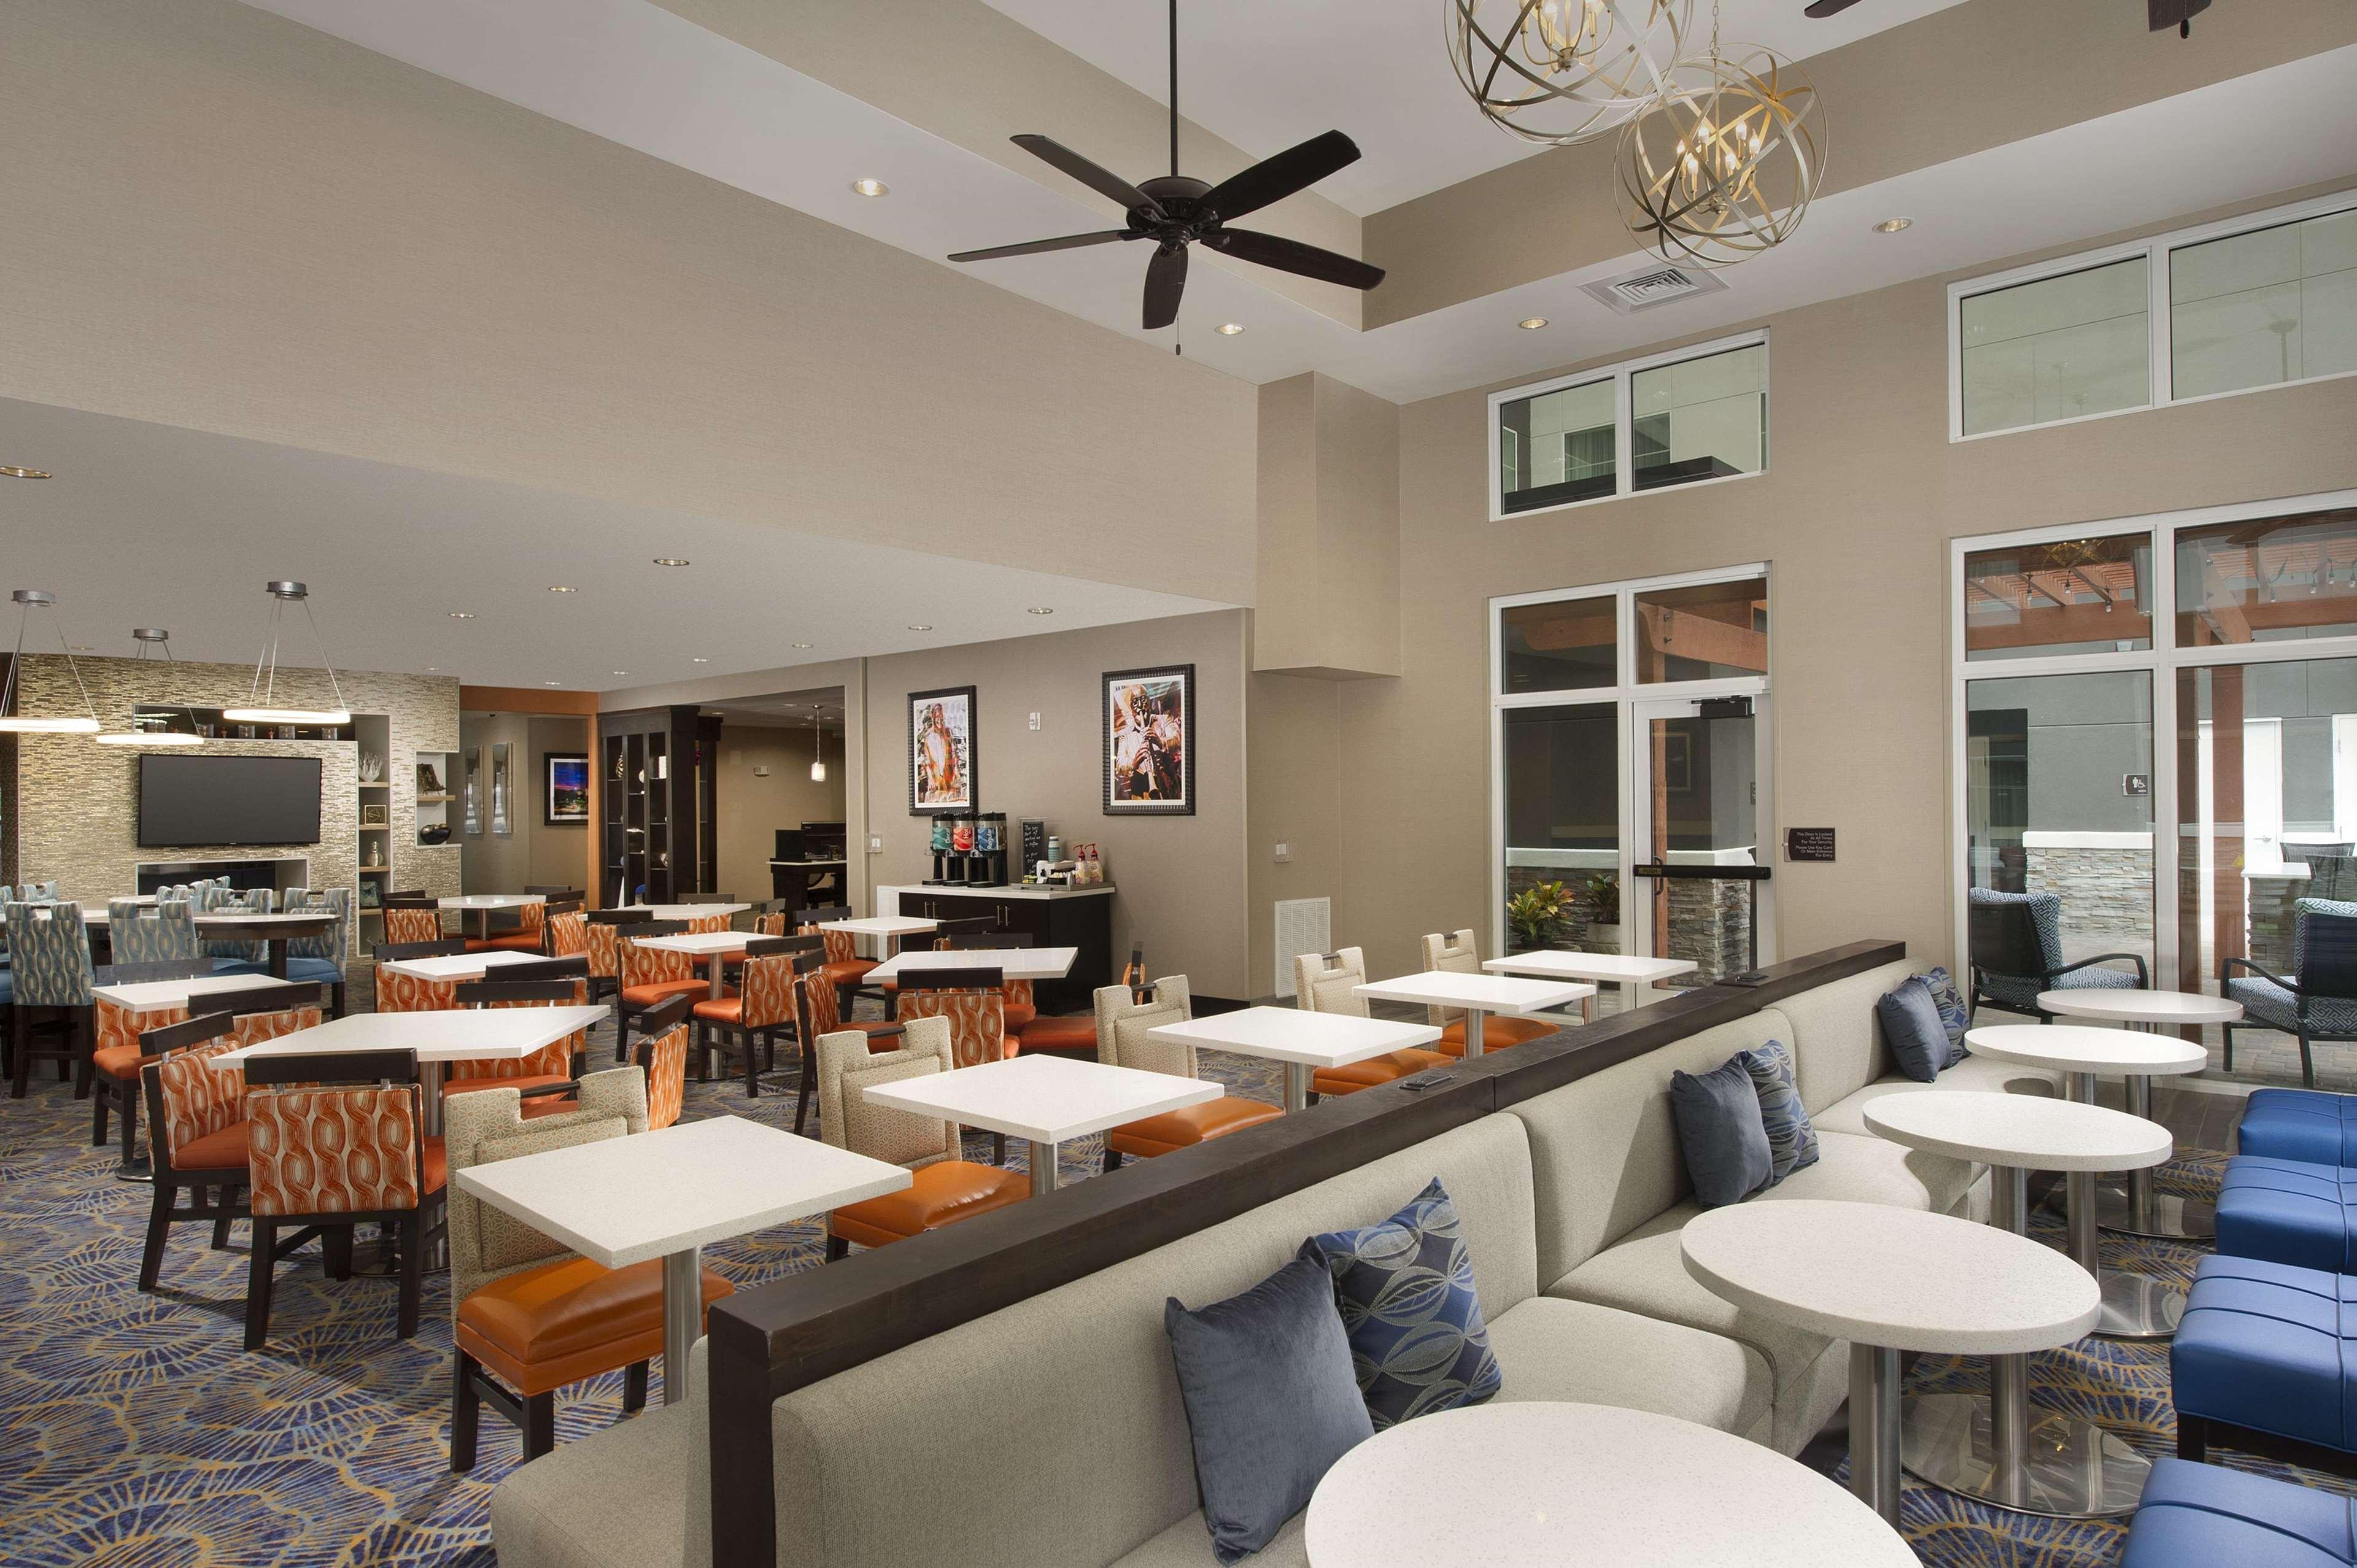 Homewood Suites By Hilton Metairie New Orleans Servizi foto